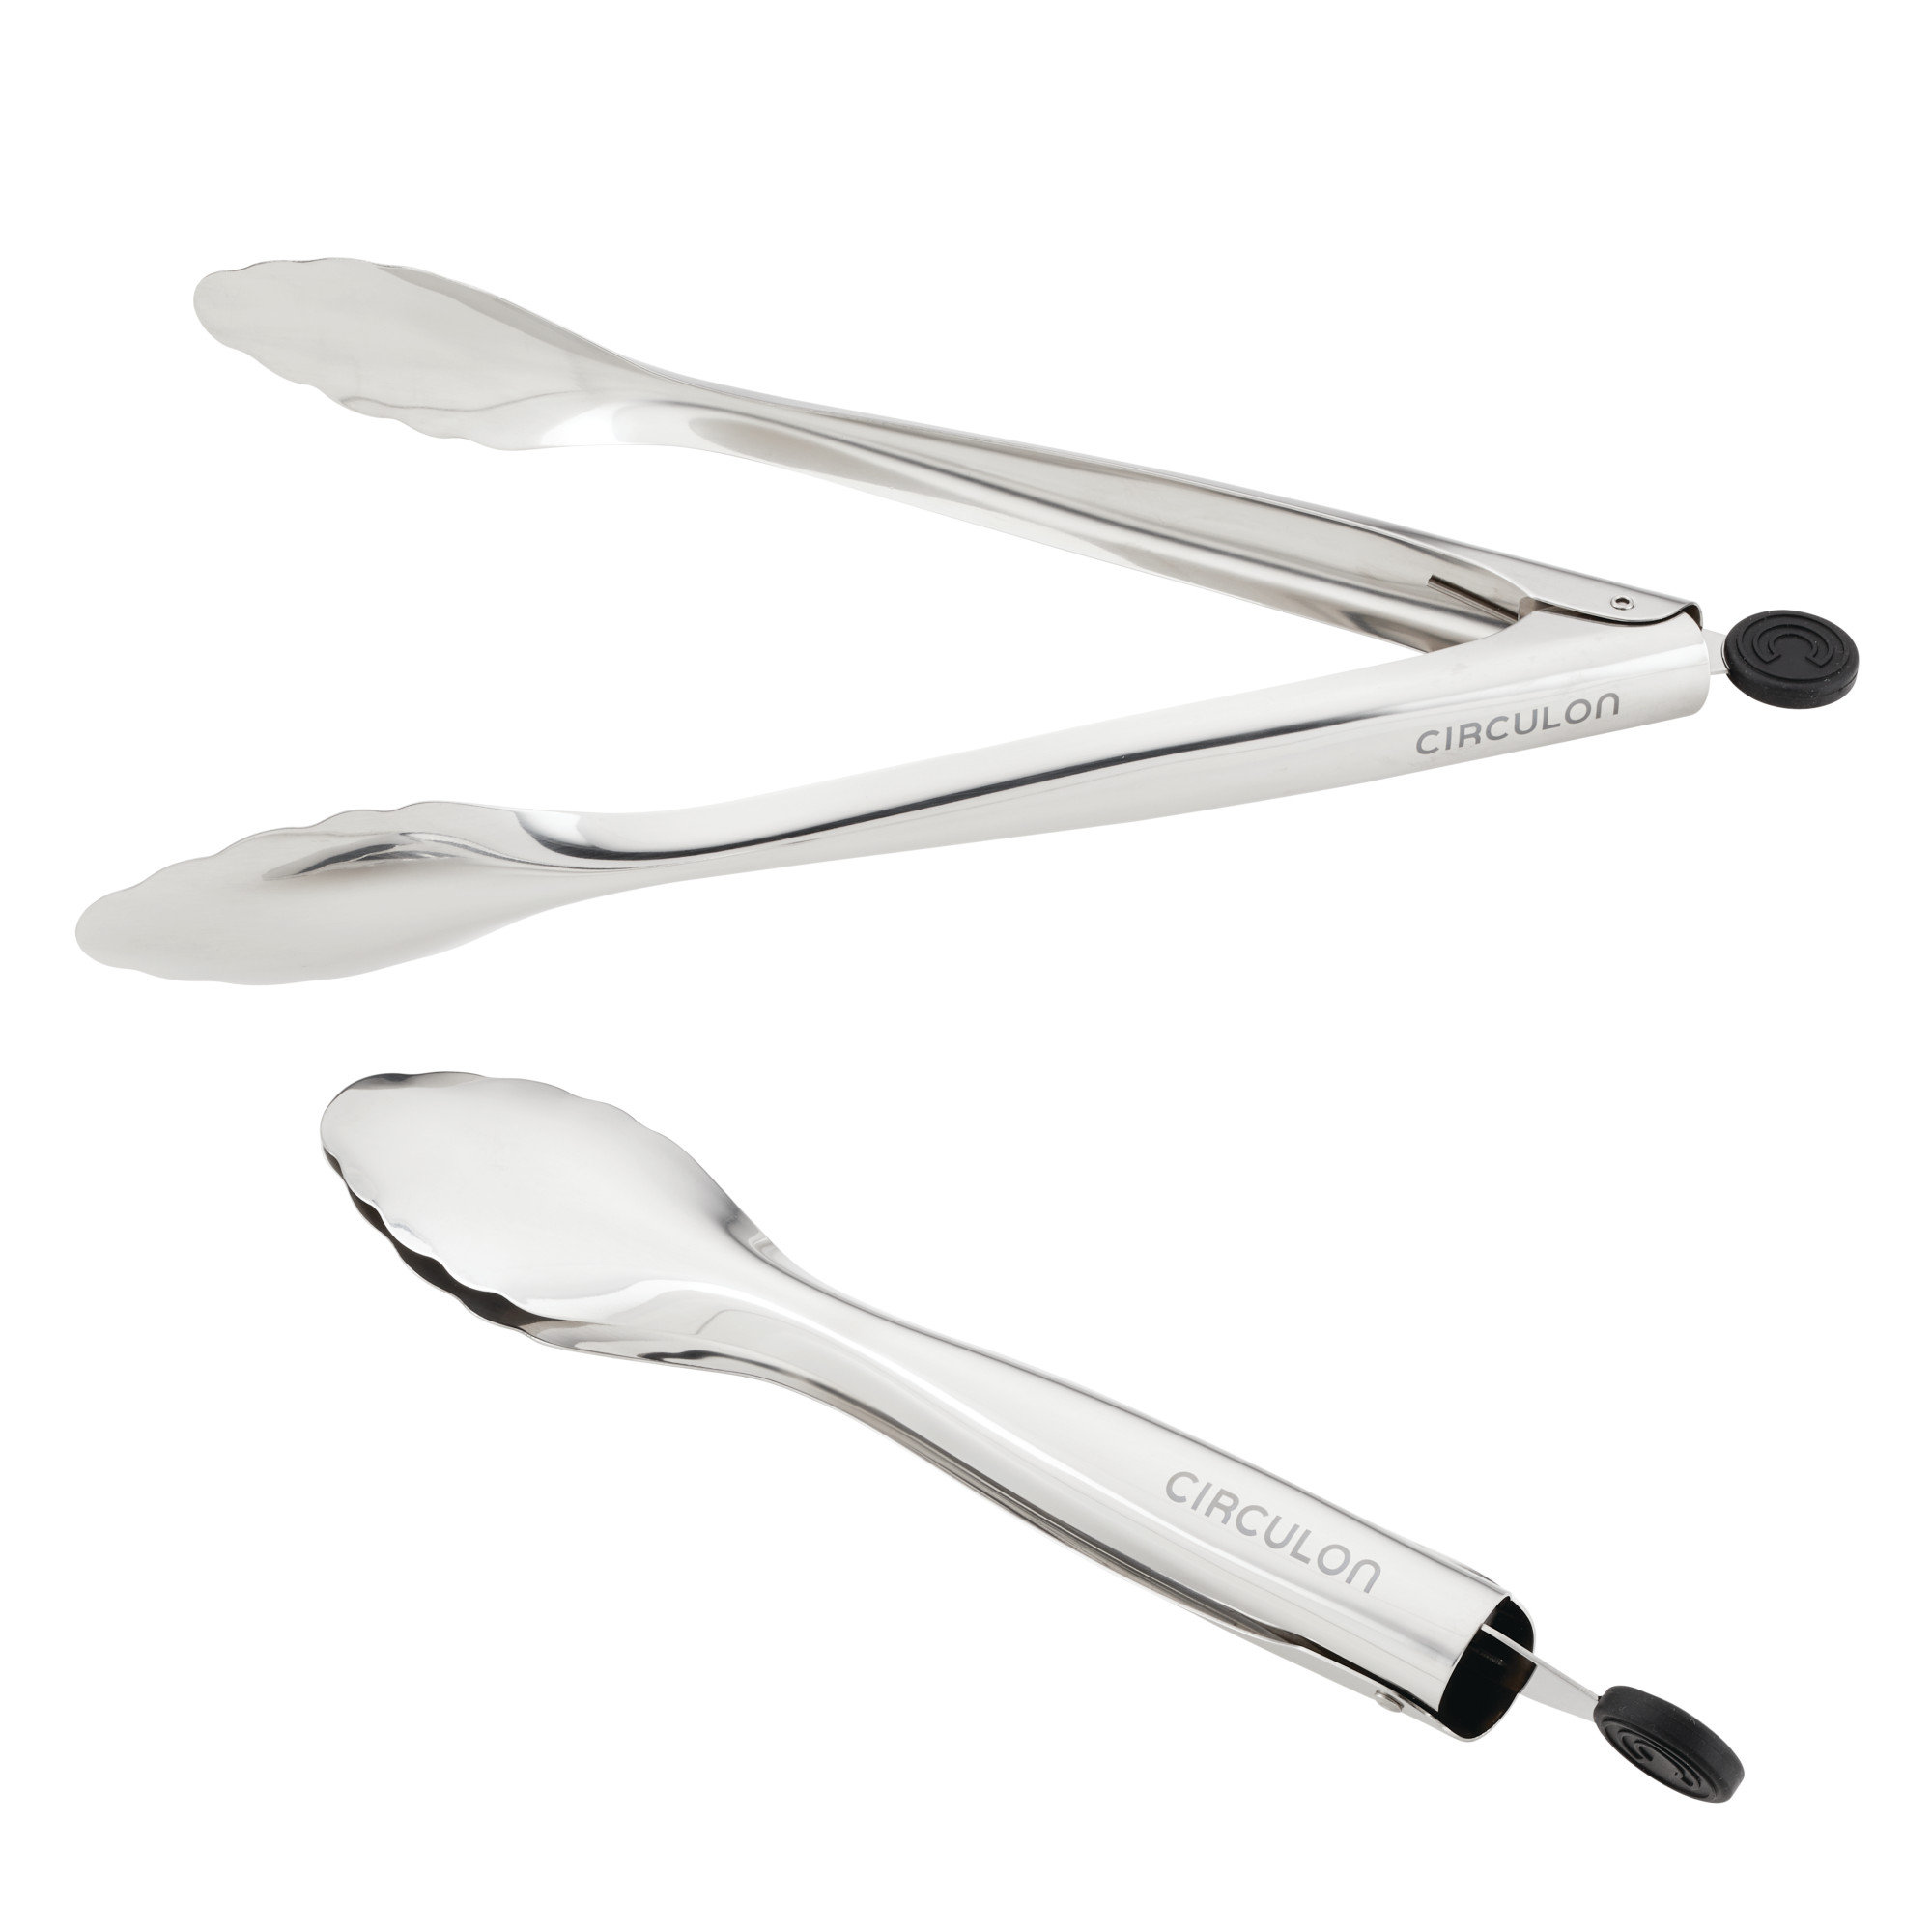 Anolon Tools and Gadgets 3-Piece Pasta Tool Set, Graphite